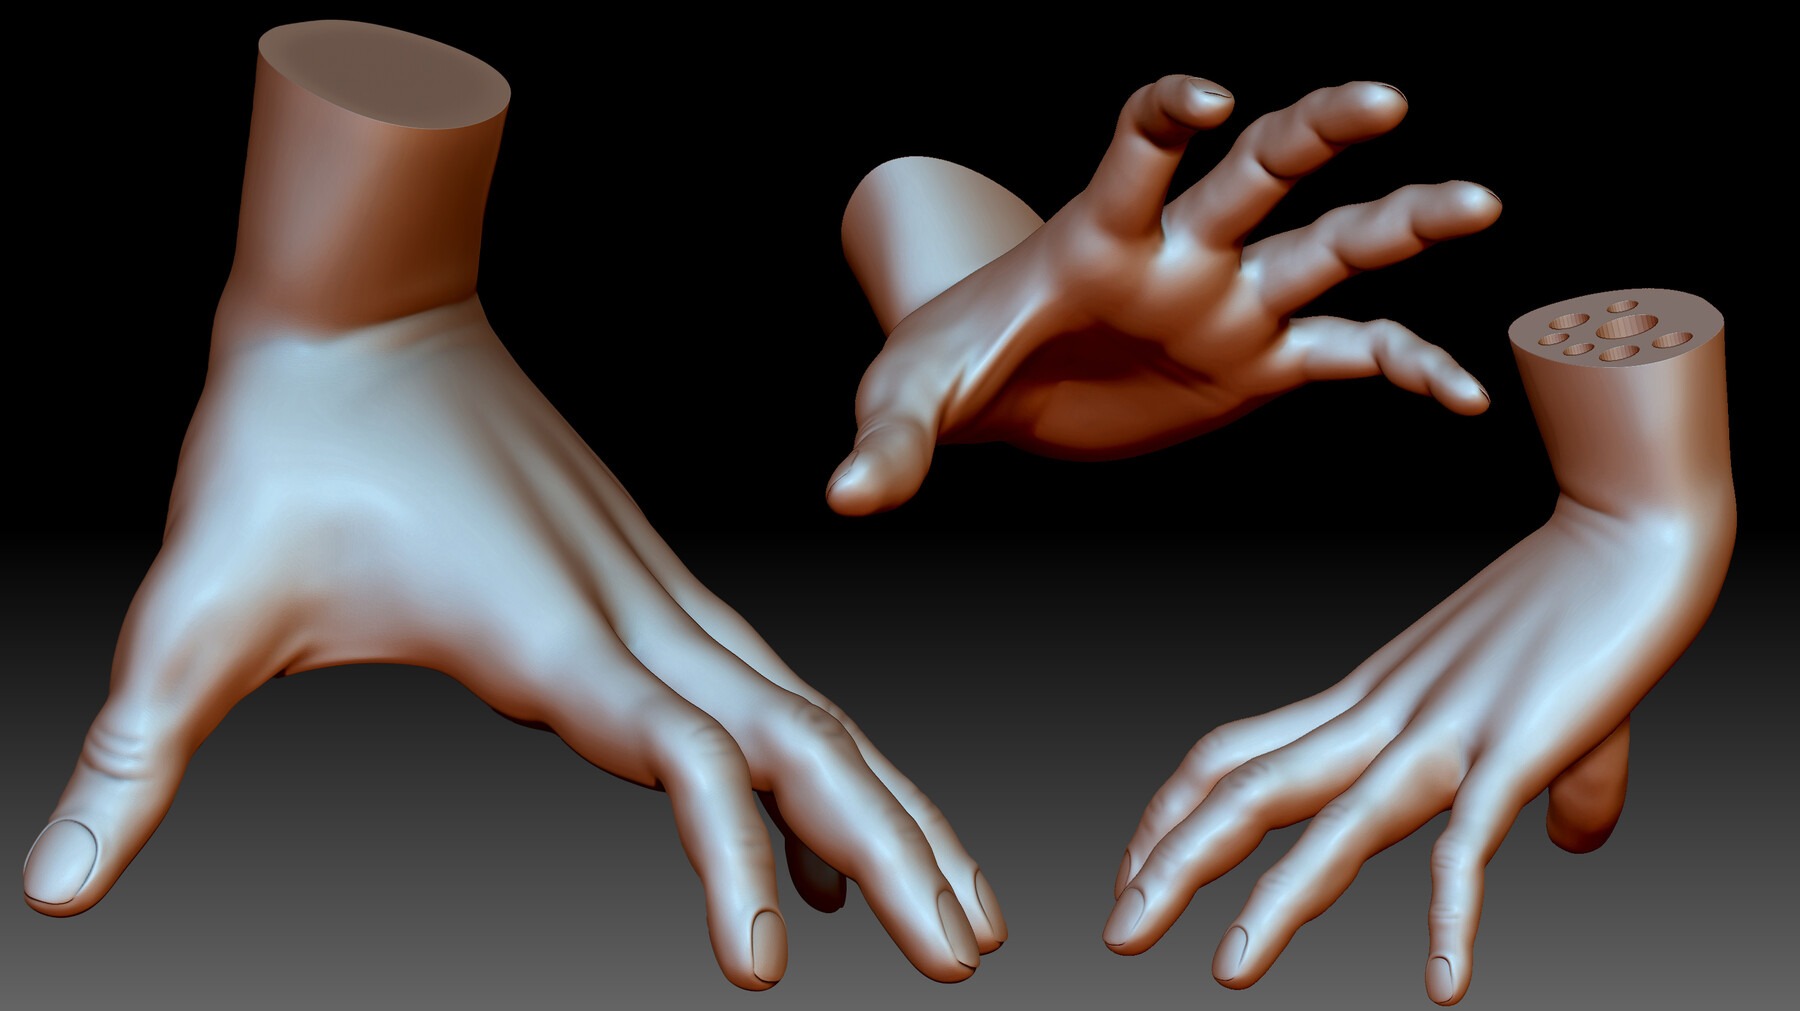 Thing hand from the Addams Family